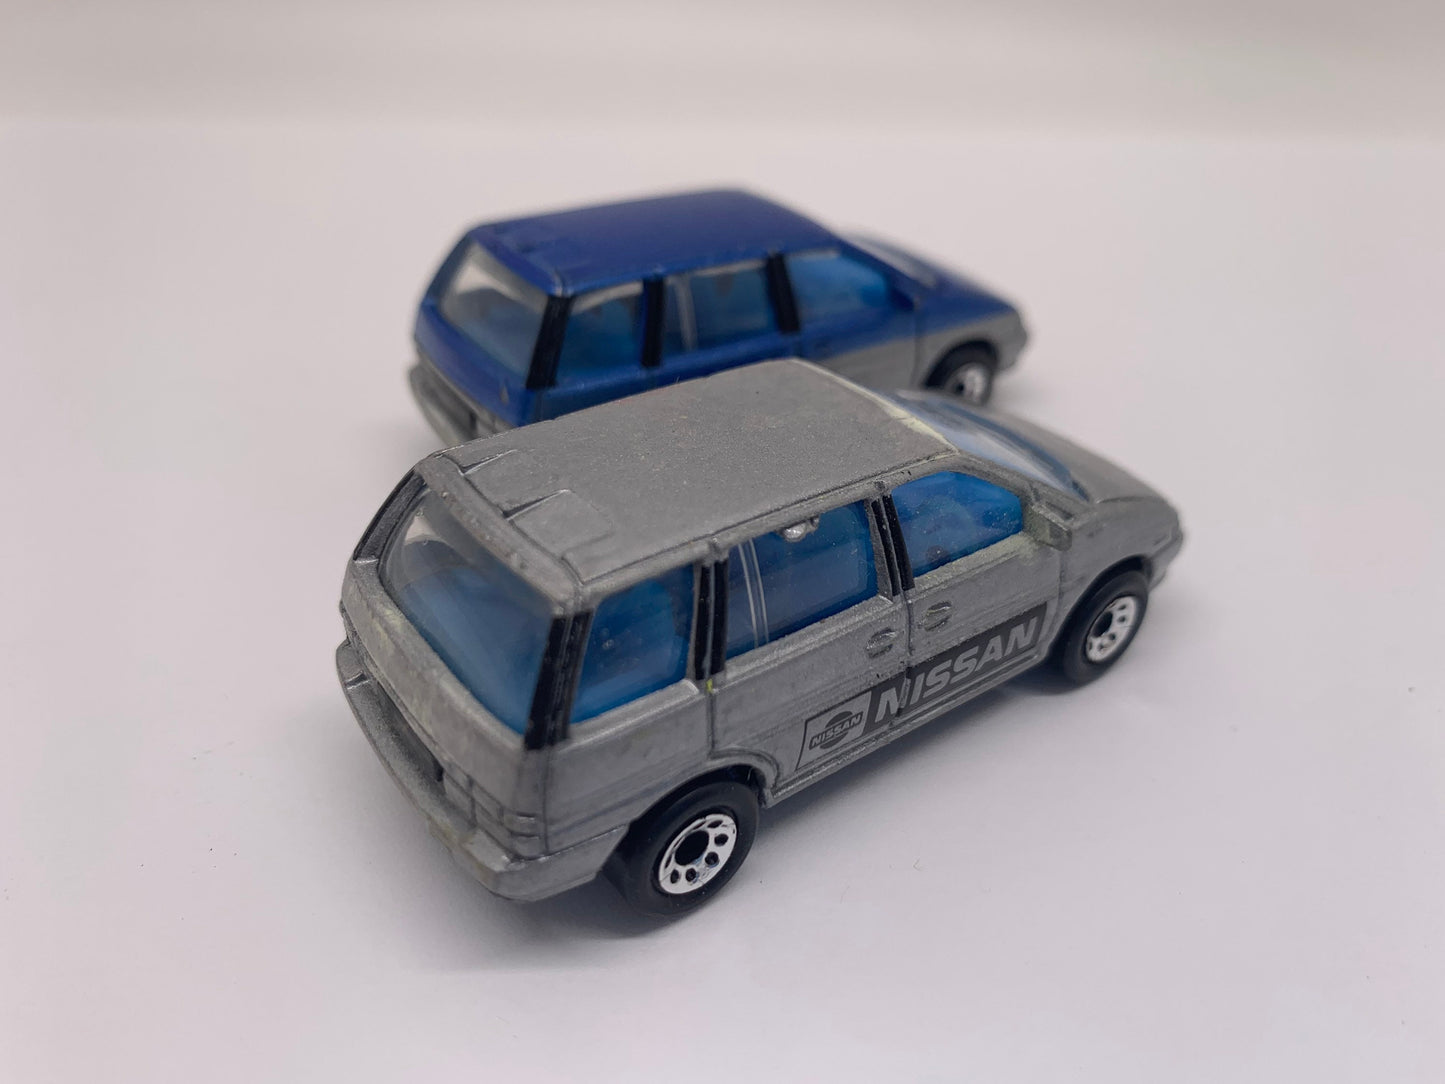 Matchbox 1991 Nissan Prairie Metalflake Blue Silver 1-75 Collectable Miniature Scale Model Toy Car Perfect Birthday Gift